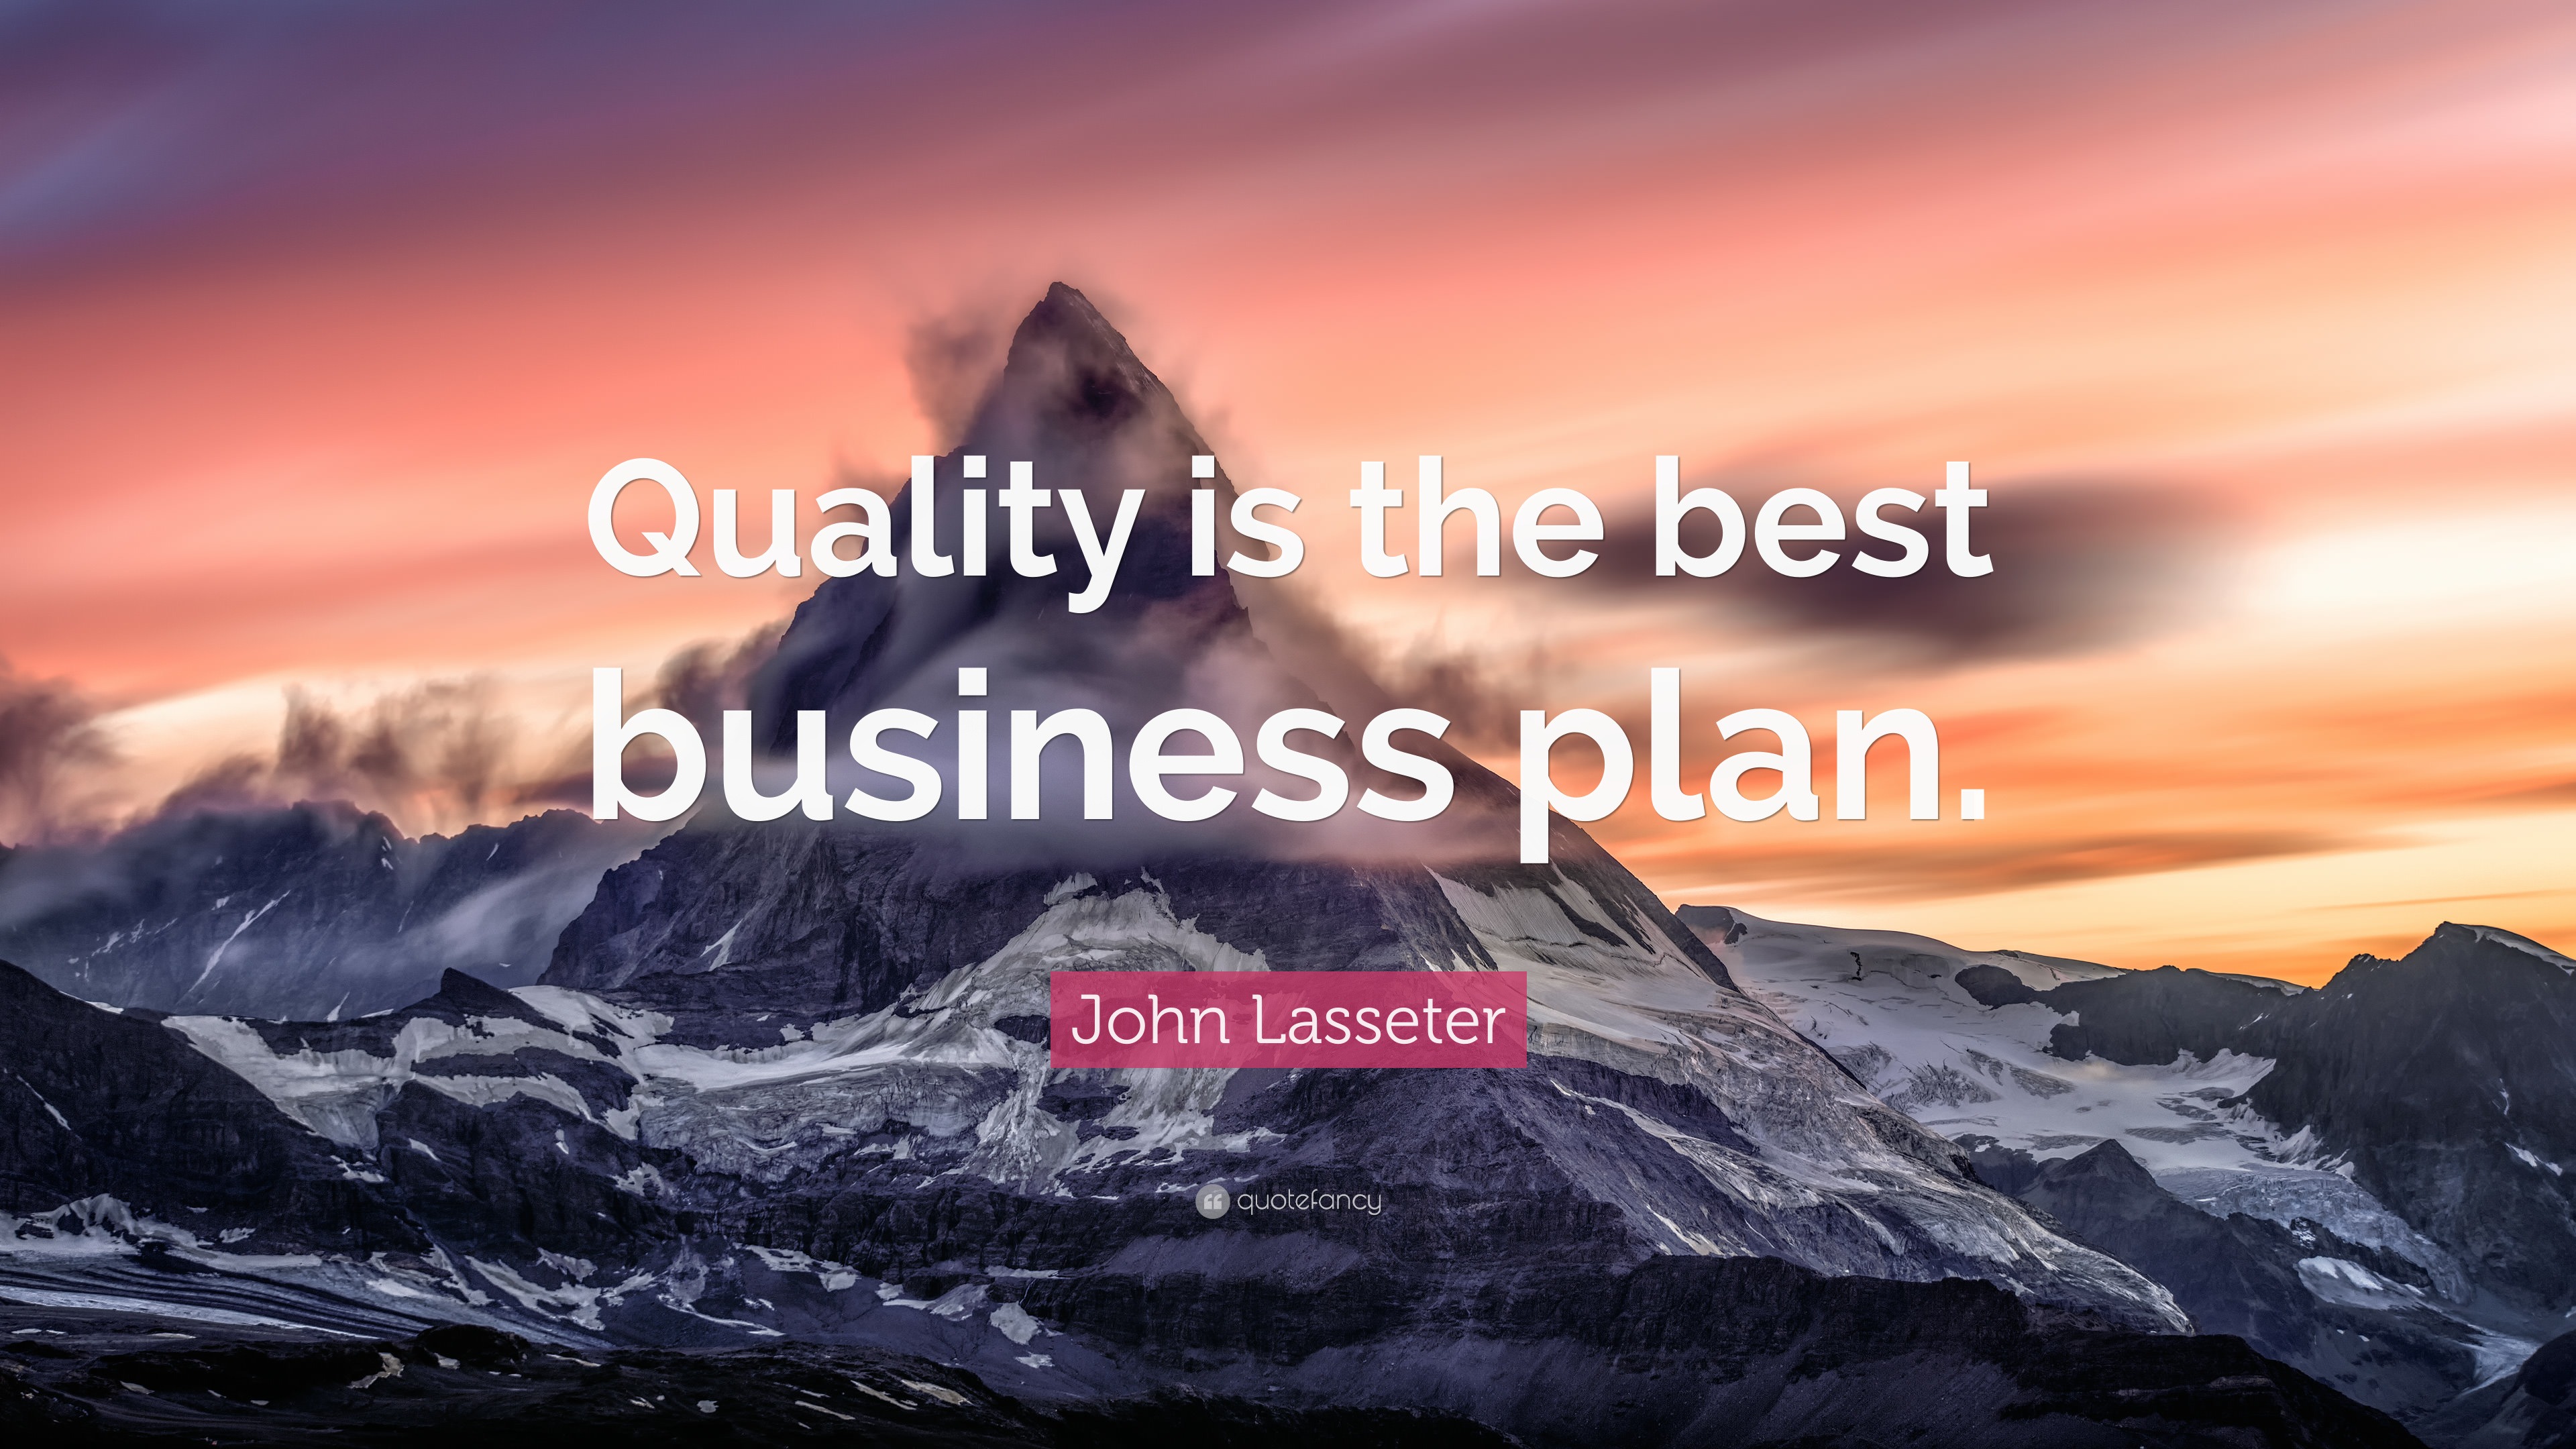 john lasseter quality is the best business plan